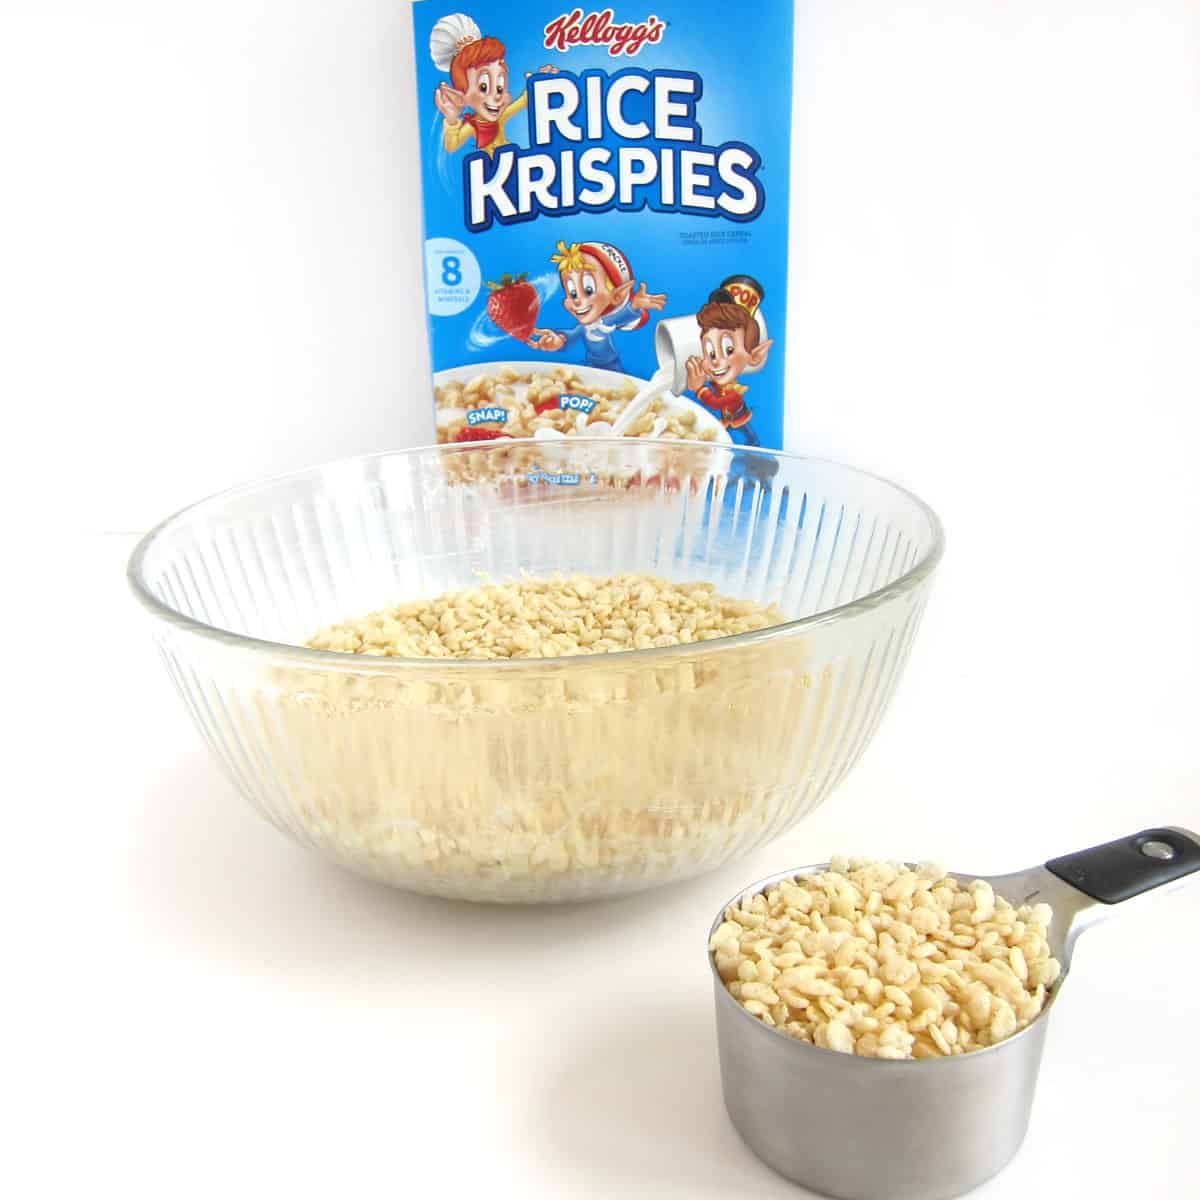 Rice Krispies Cereal in a box, bowl, and measuring cup